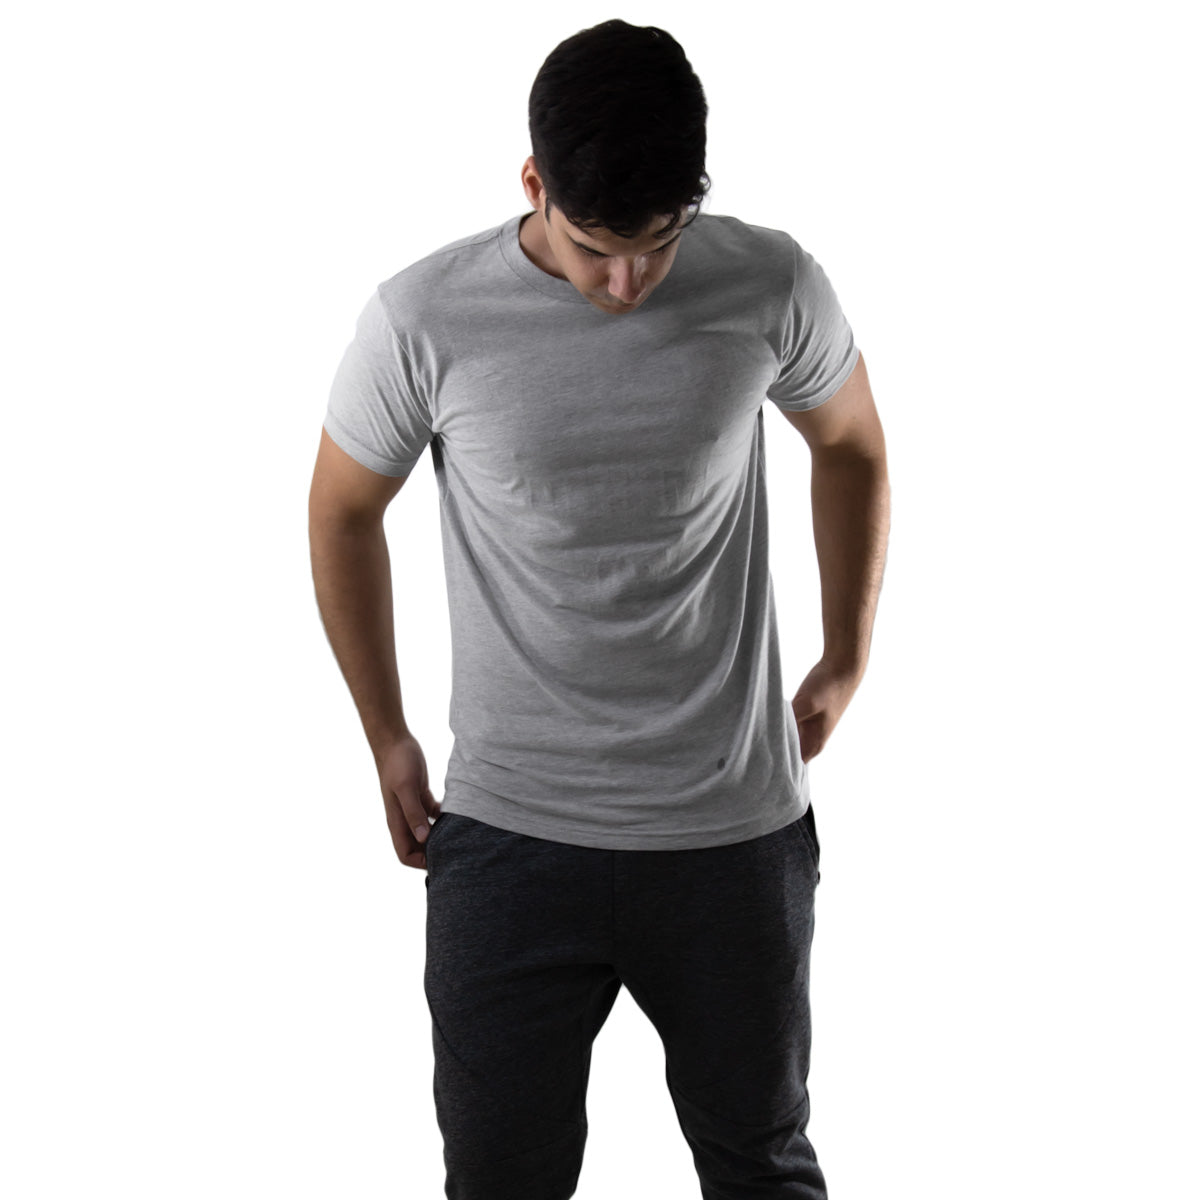 Sweat Activated Invisible Message Workout Tee for Men